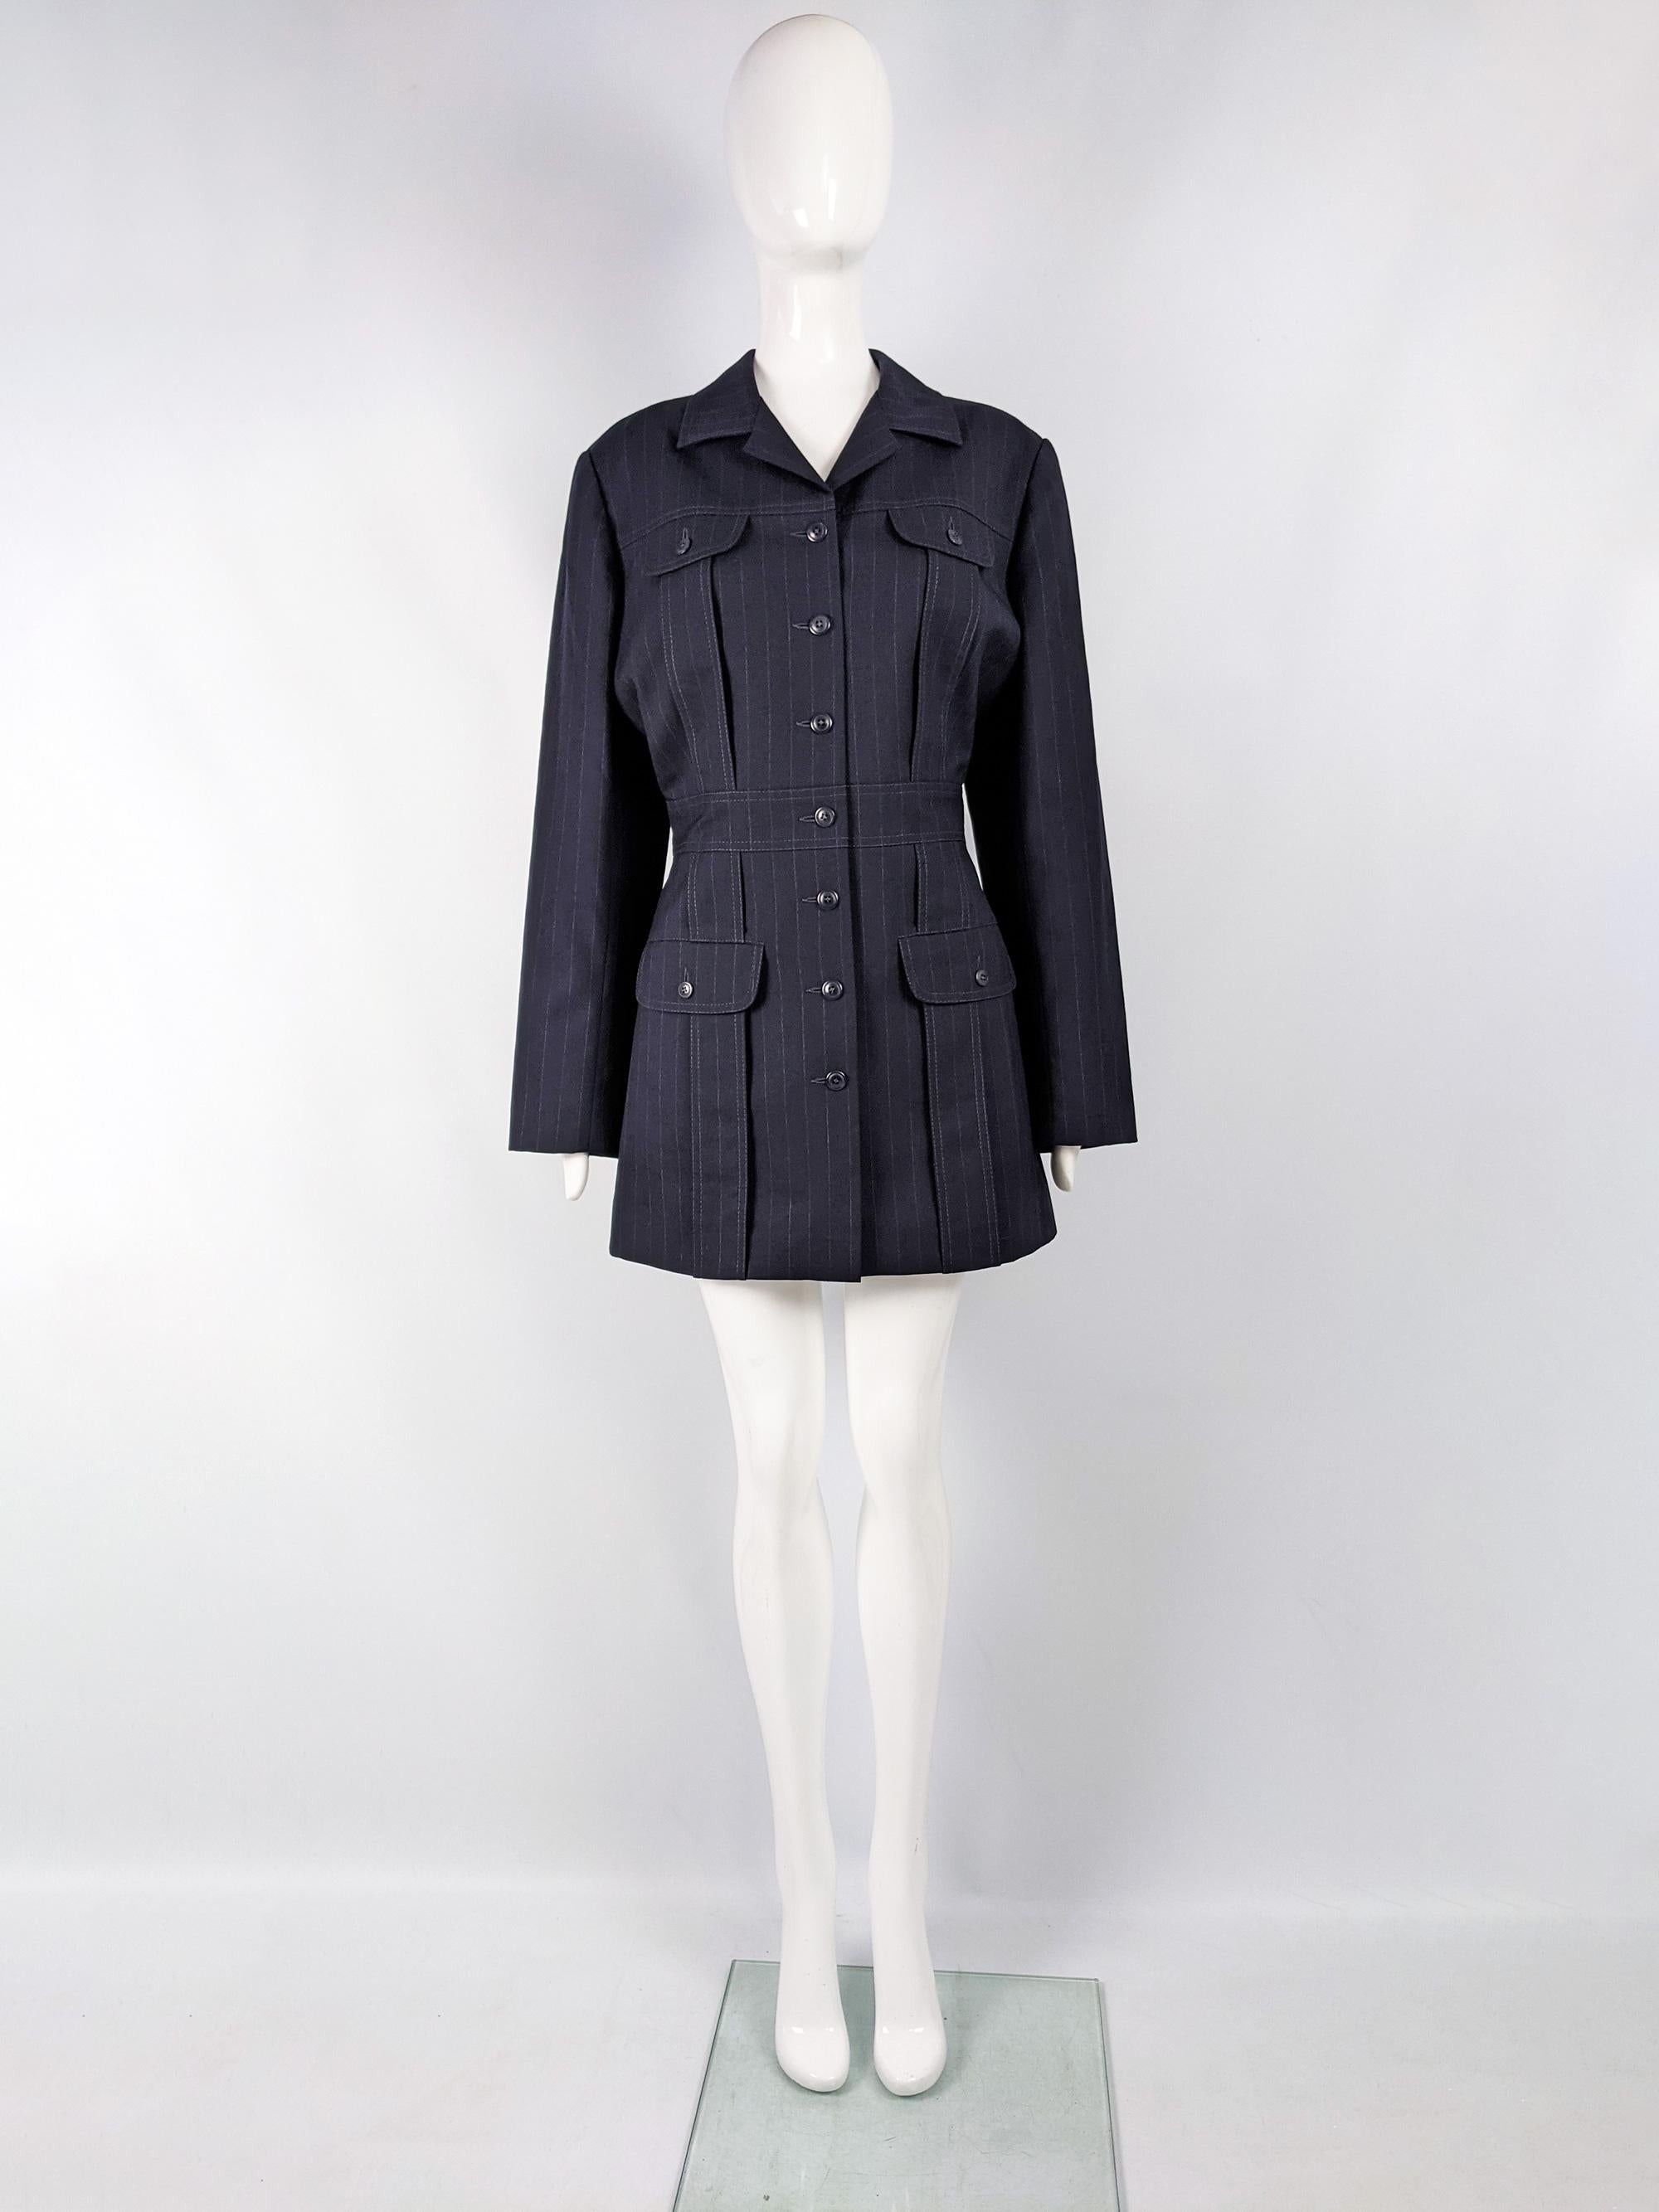 An incredibly chic vintage women's blazer jacket from the 80s by luxury American fashion designer, Norma Kamali. In a dark navy wool suiting fabric with a pinstripe detail throughout. This would also look great worn as a dress. IT has a nipped waist